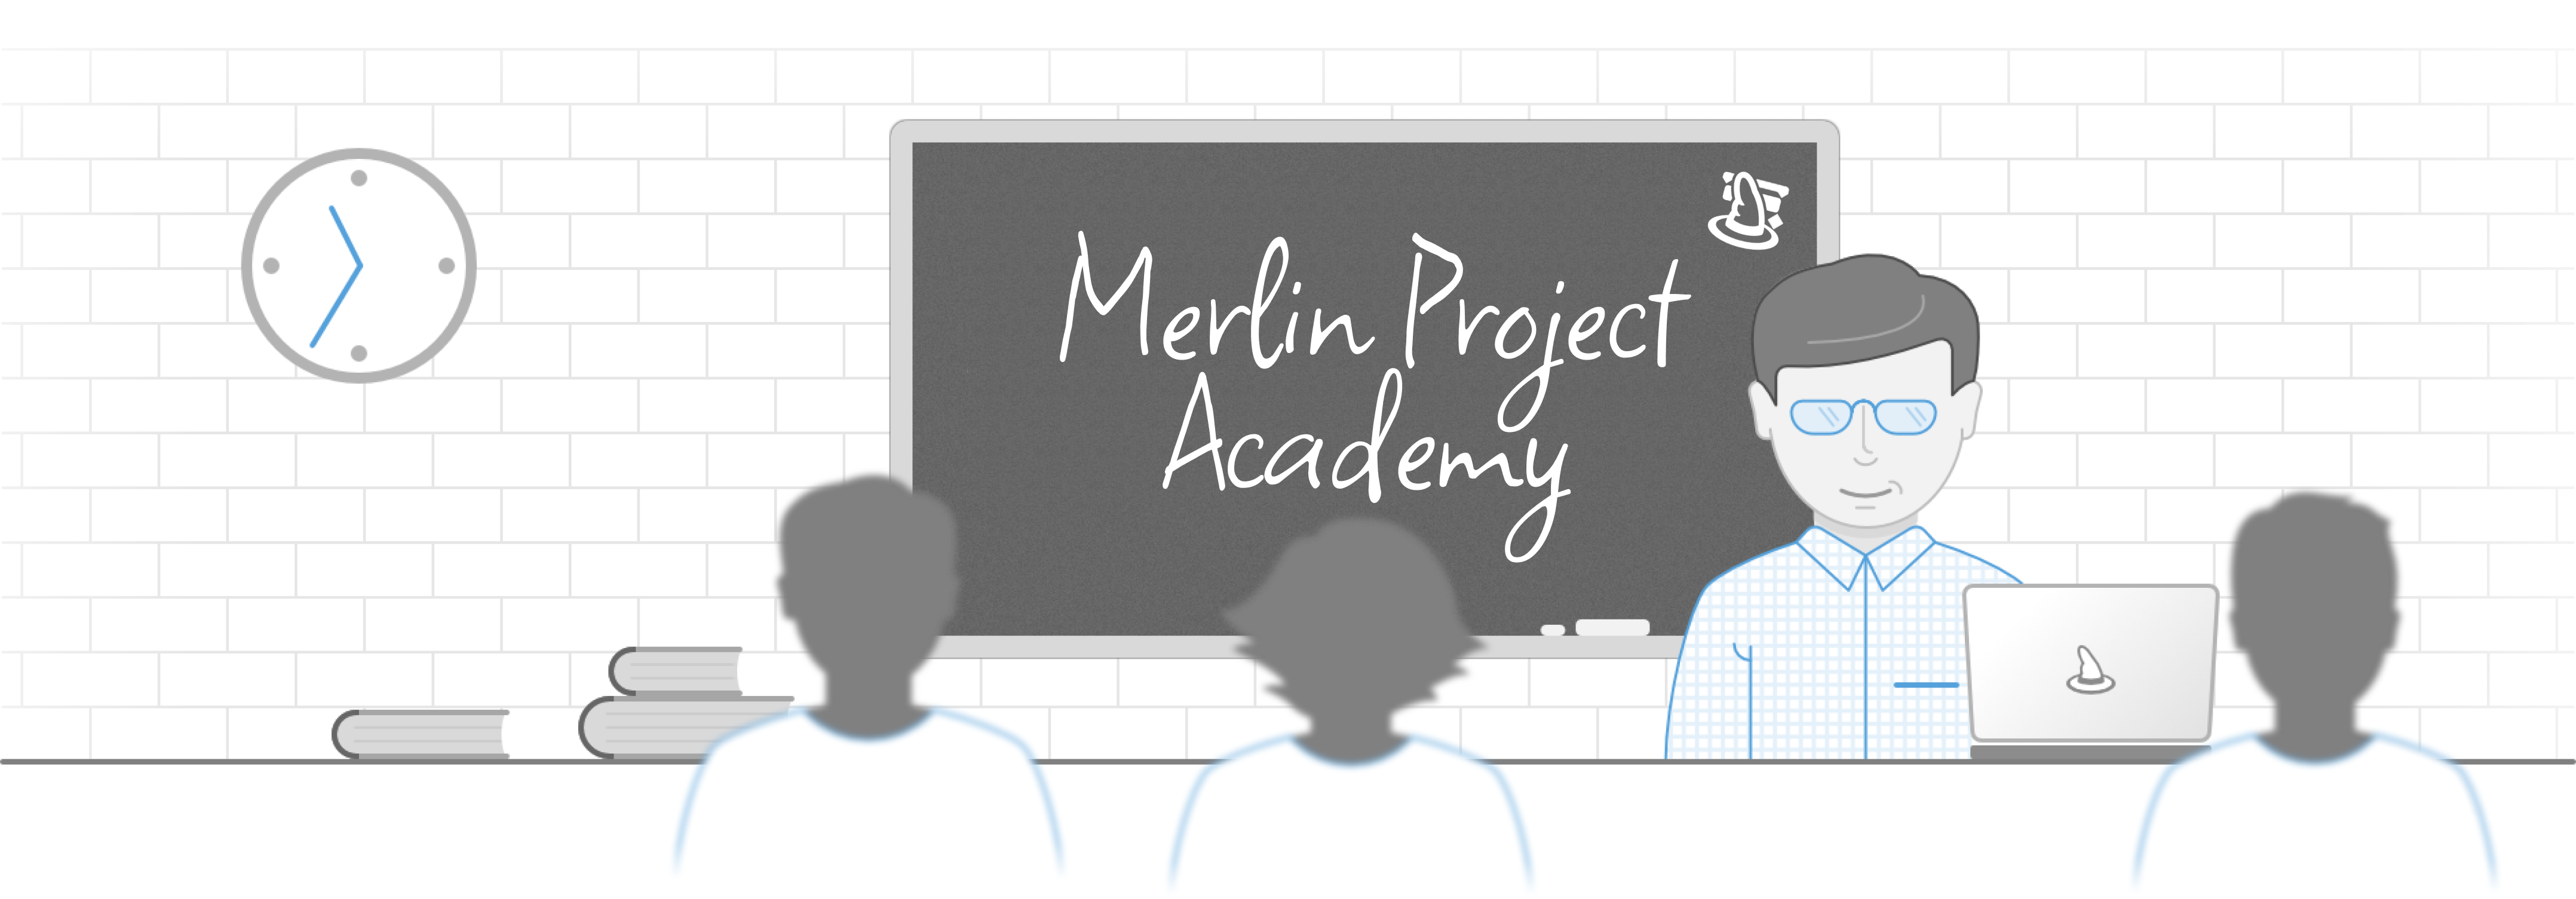 Welcome to the Merlin Project Academy